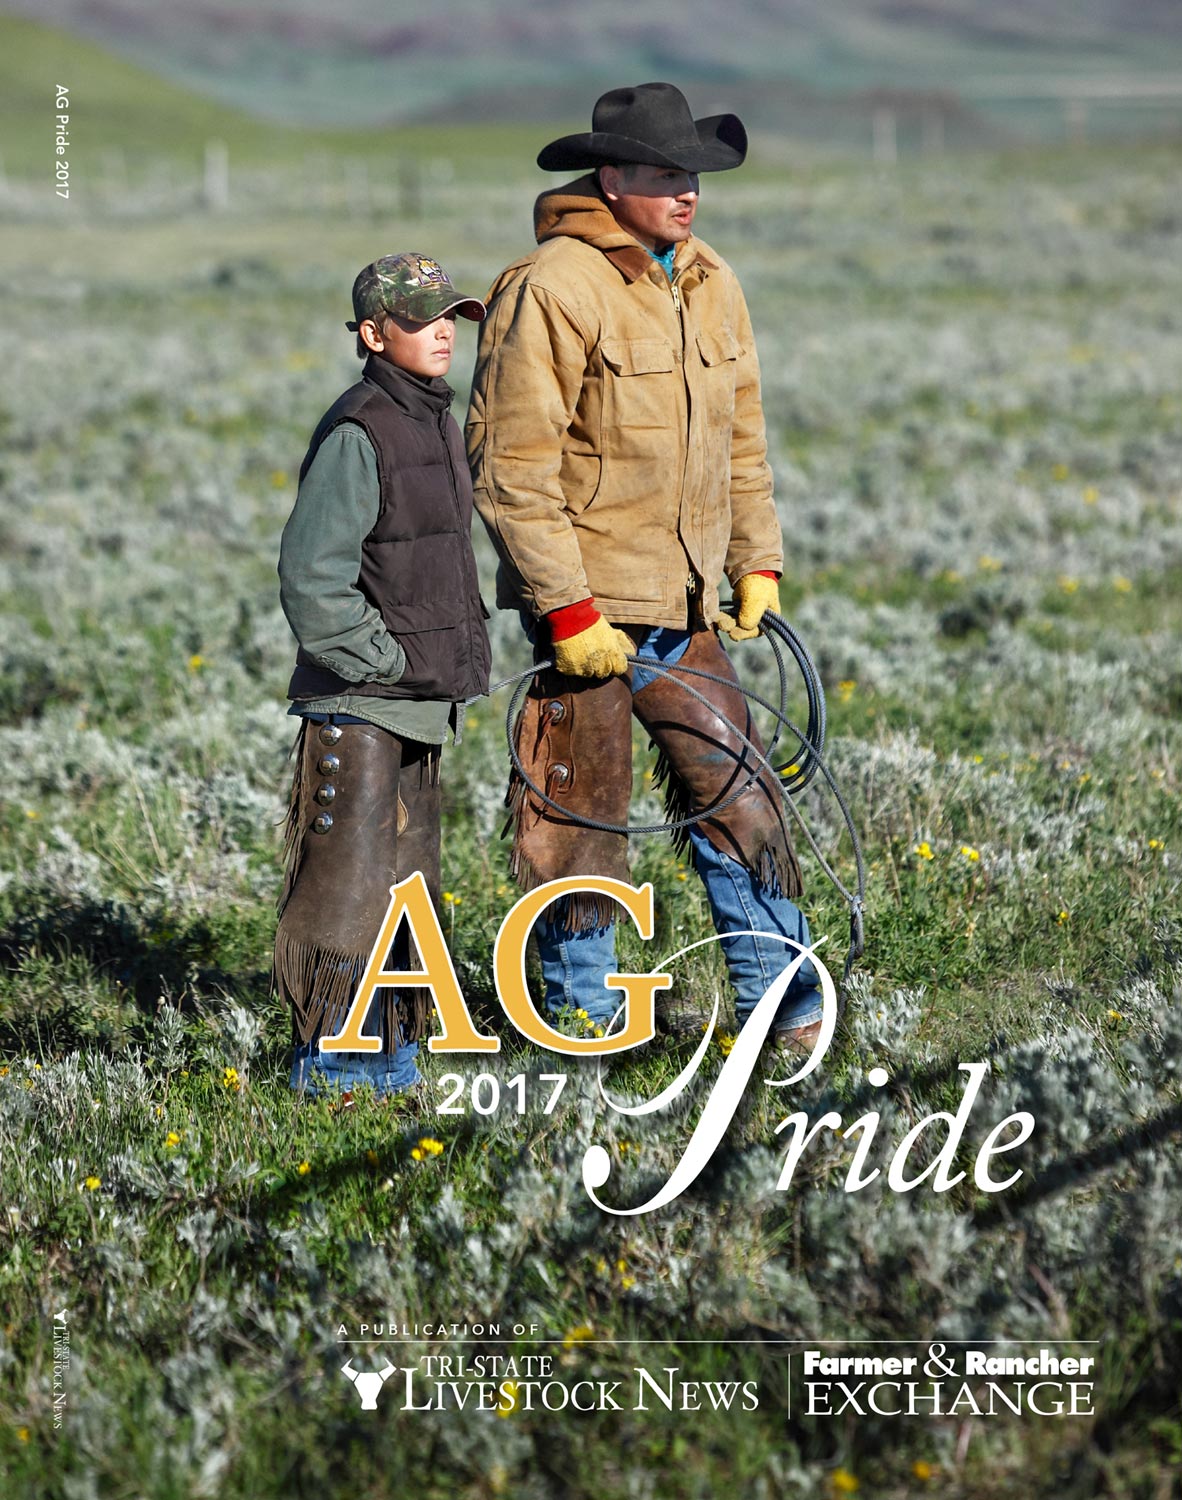 Ranching photo on cover of agricultural publication 'Ag Pride'